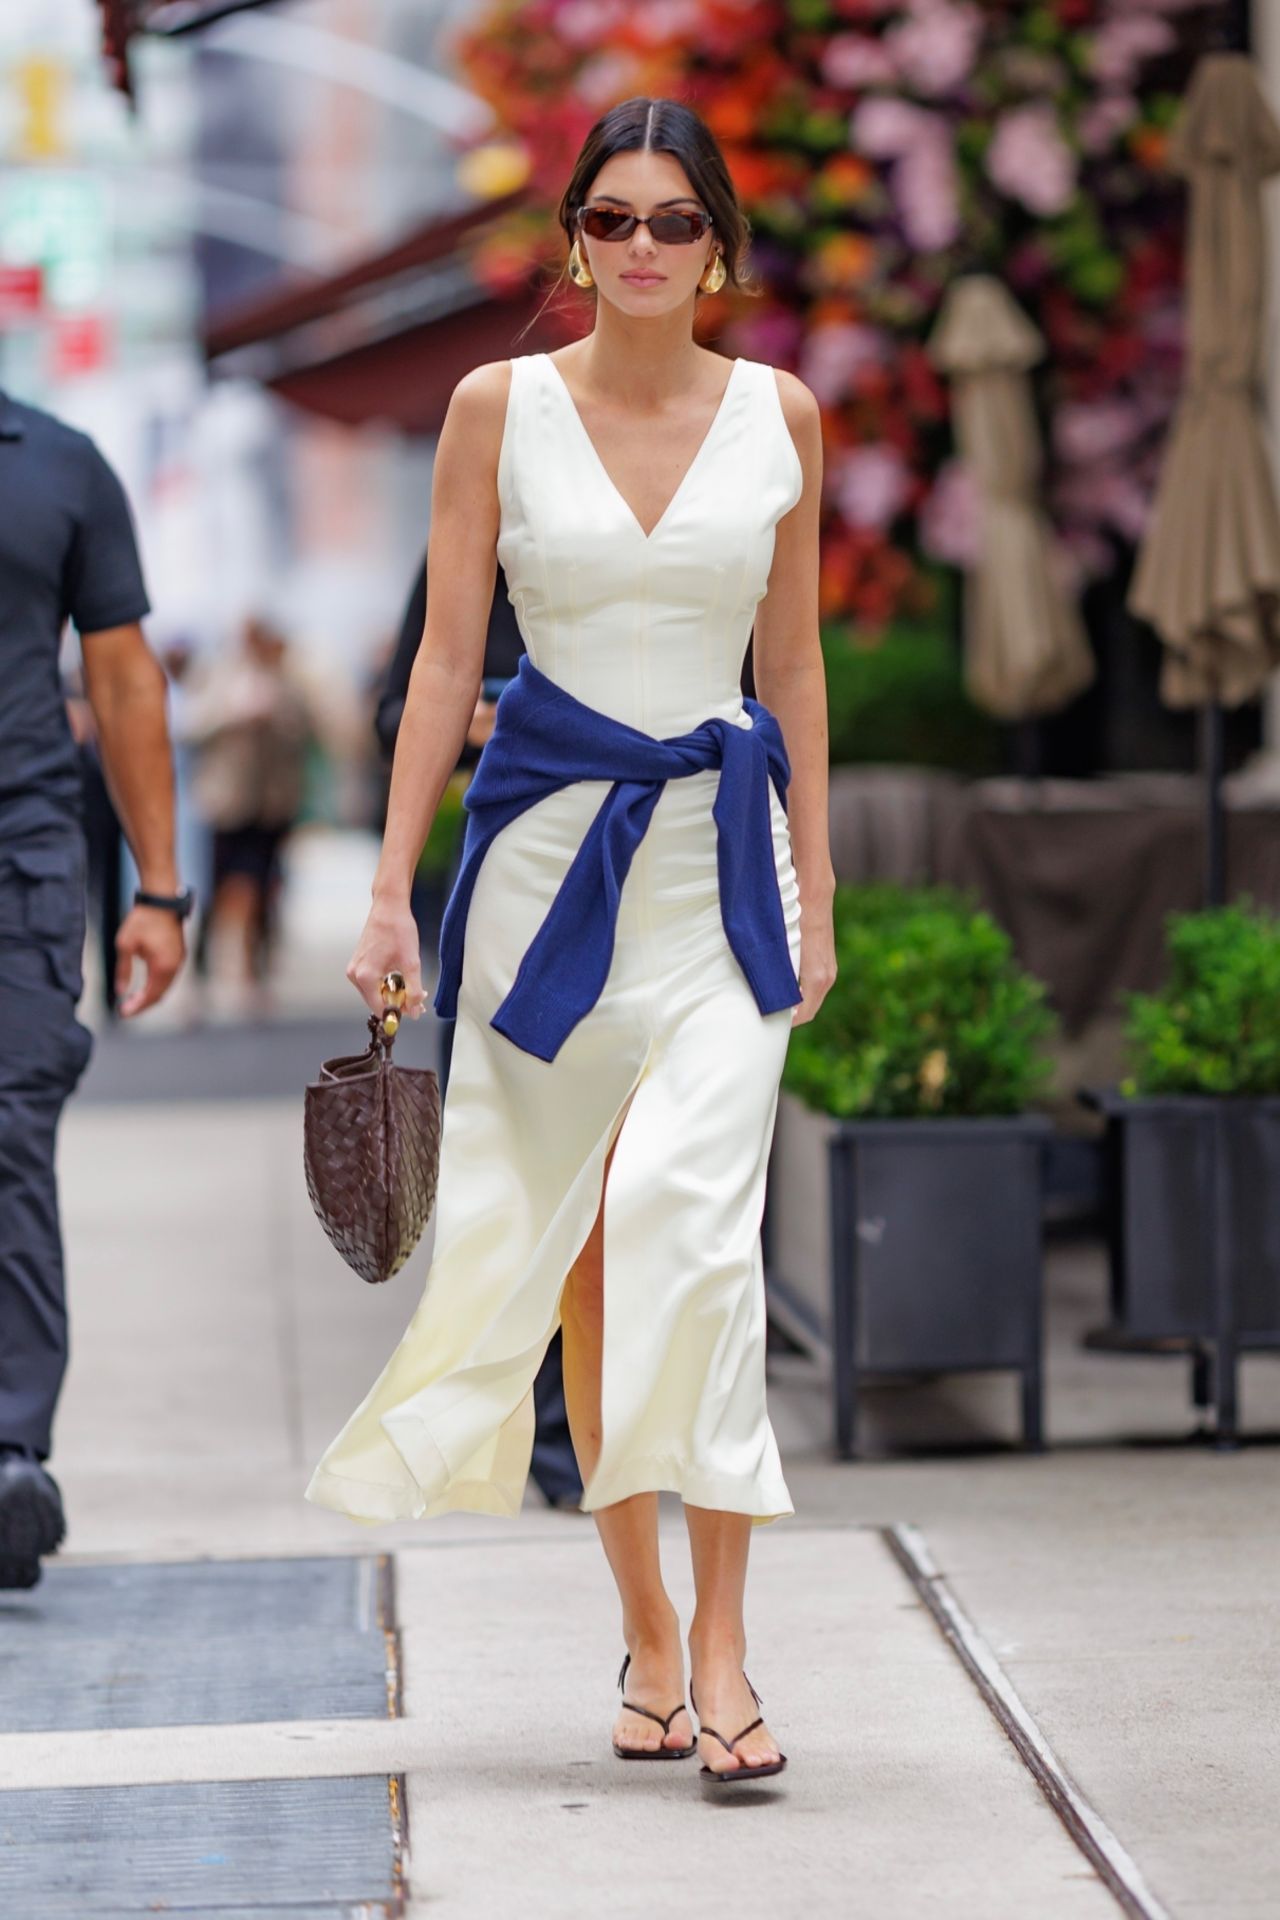 Kendall Jenner New York City May 11, 2019 – Star Style